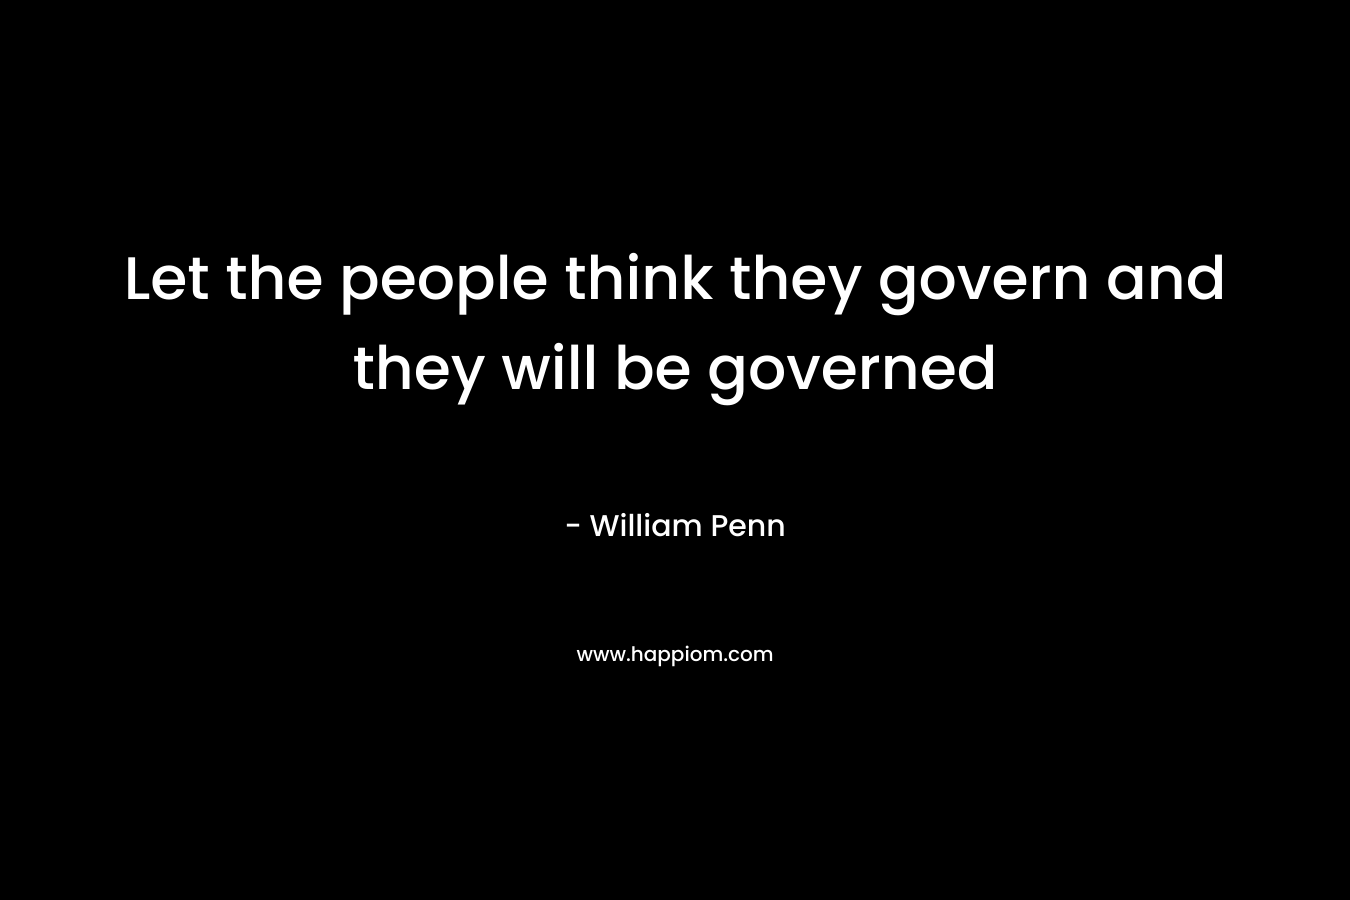 Let the people think they govern and they will be governed – William Penn